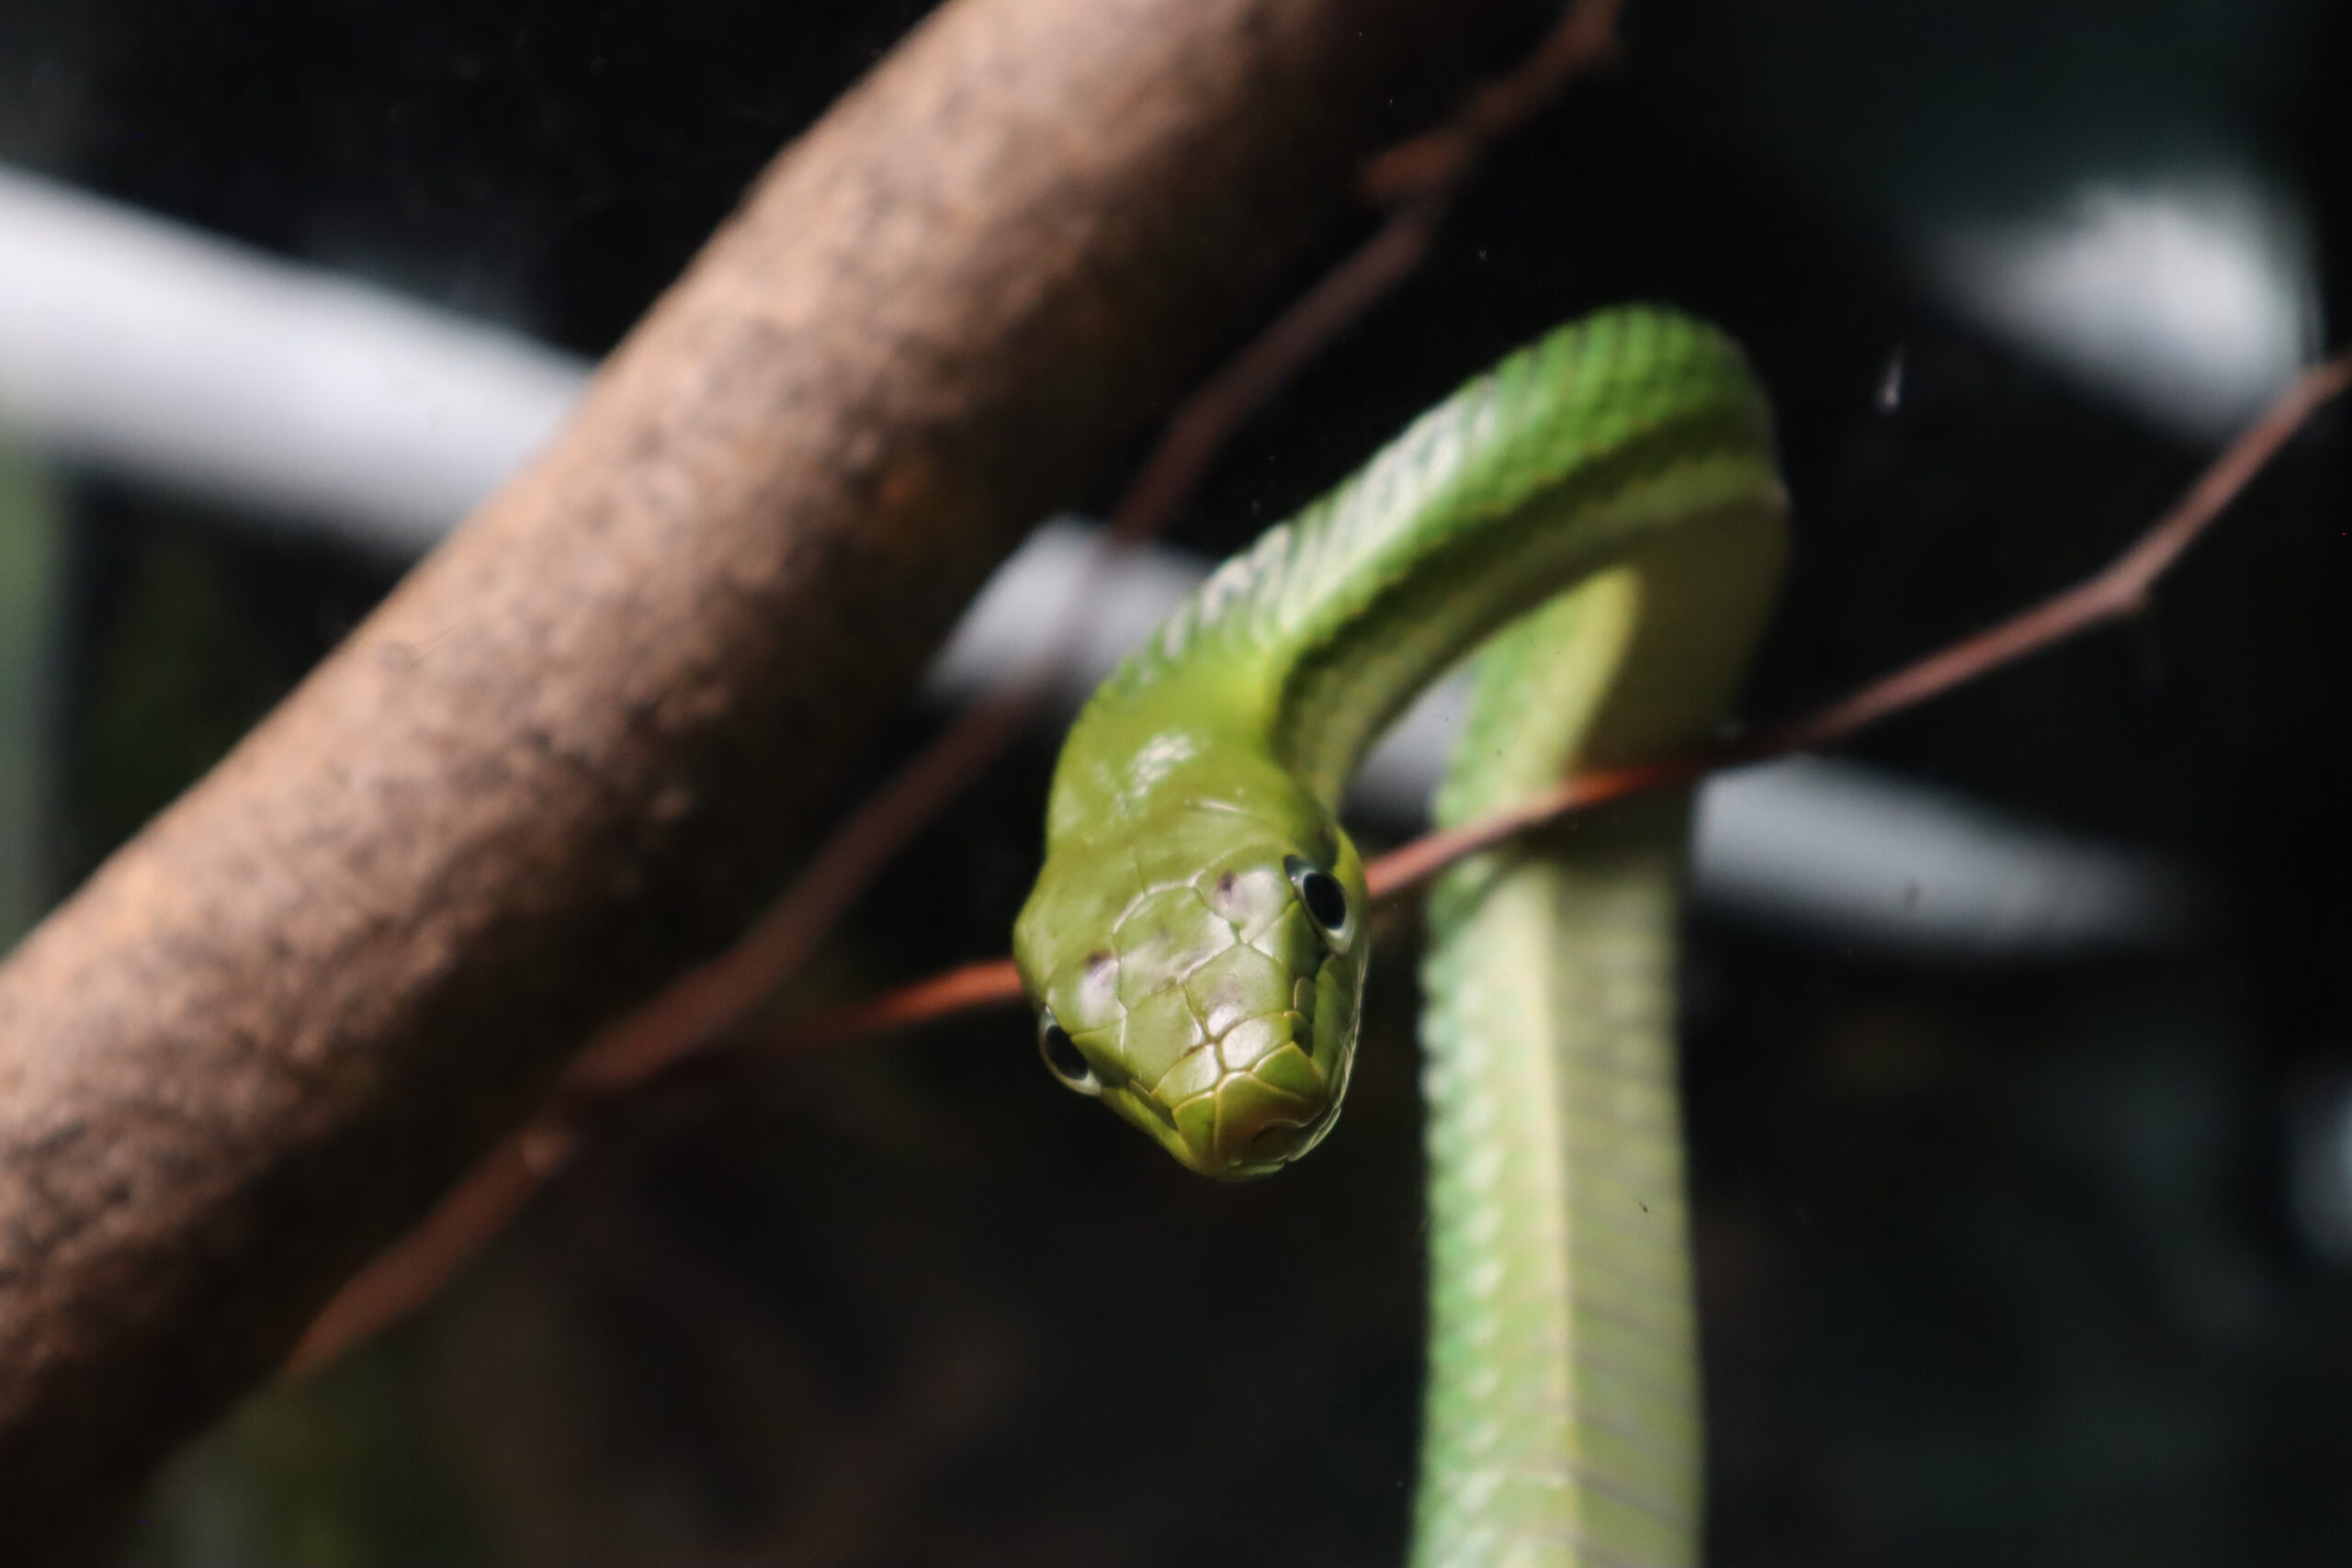 Red-tailed Green Rat Snake